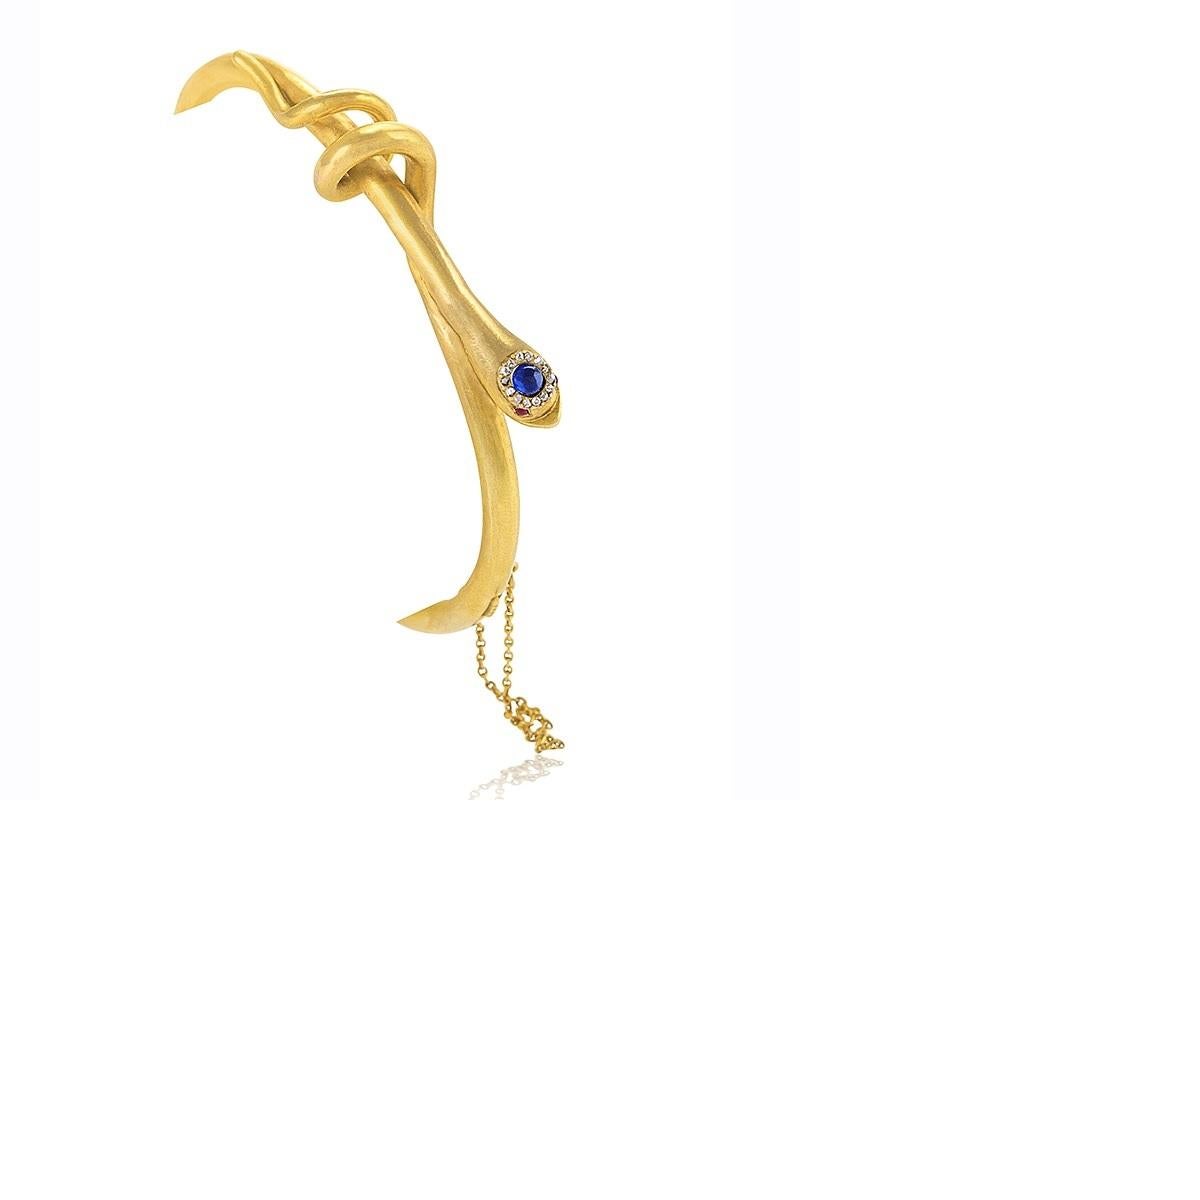 An English Victorian 18 karat gold hinged snake bangle with diamond, sapphire and ruby. The head is a cabochon blue sapphire that has the approximate weight of .15 carat surrounded by .12 carat of rose cut diamonds with 2 cabochon ruby eyes that